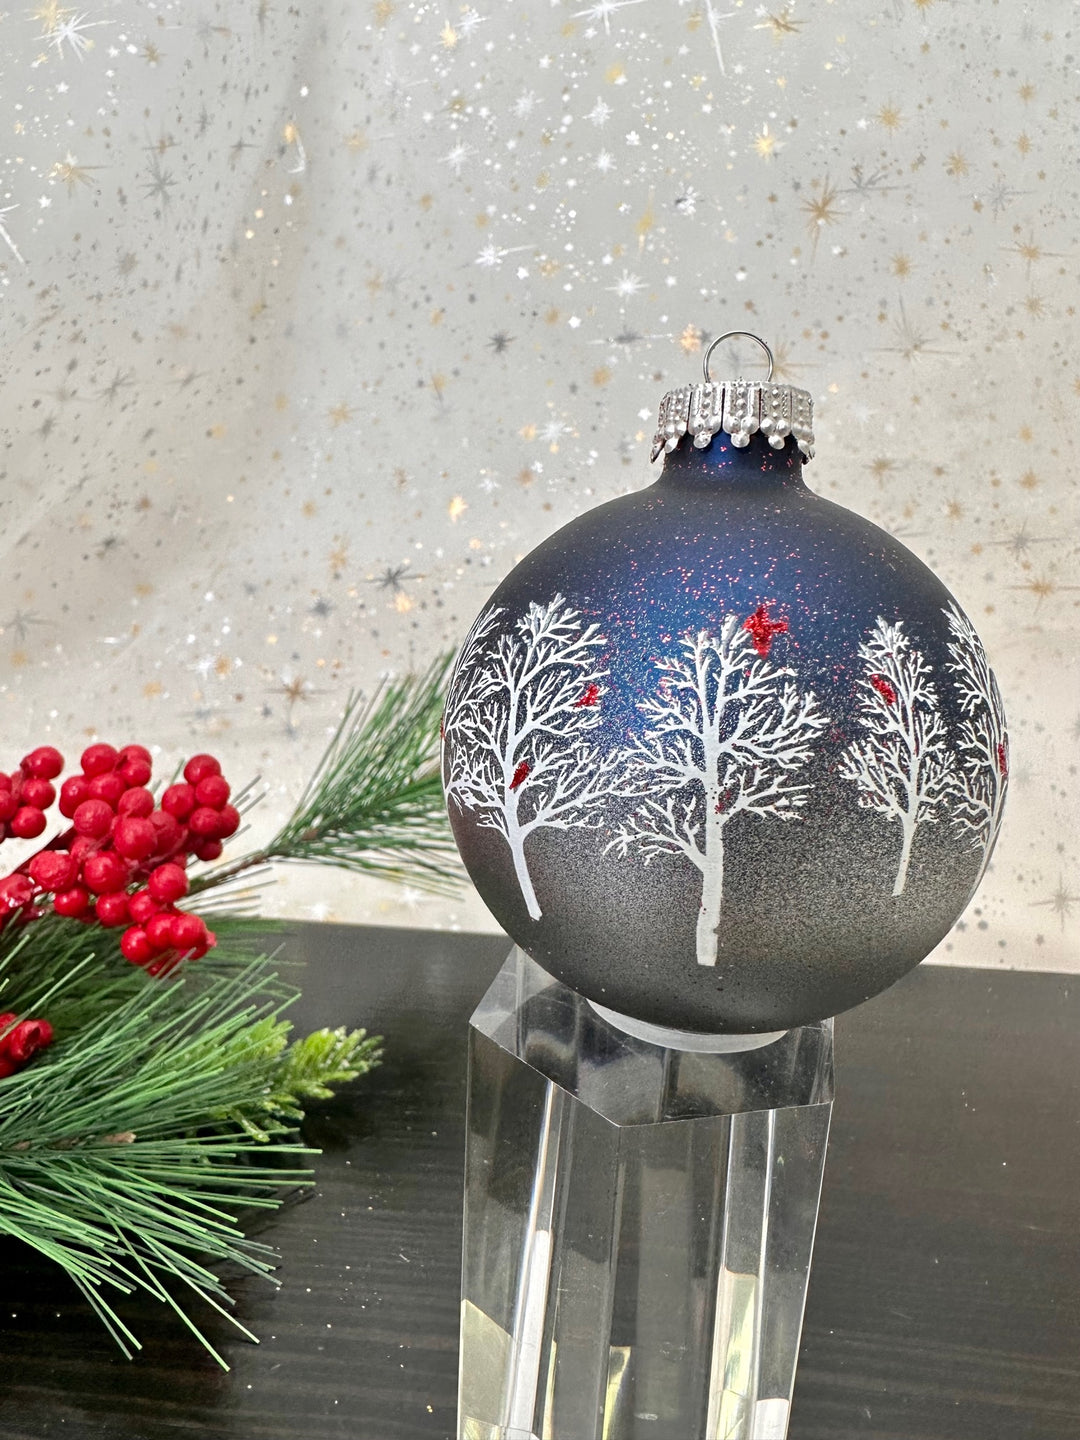 Glass Christmas Tree Ornaments - 67mm/2.63" [4 Pieces] Decorated Balls from Christmas by Krebs Seamless Hanging Holiday Decor (Midnight Haze & Silver w/ Trees & Cardinals)